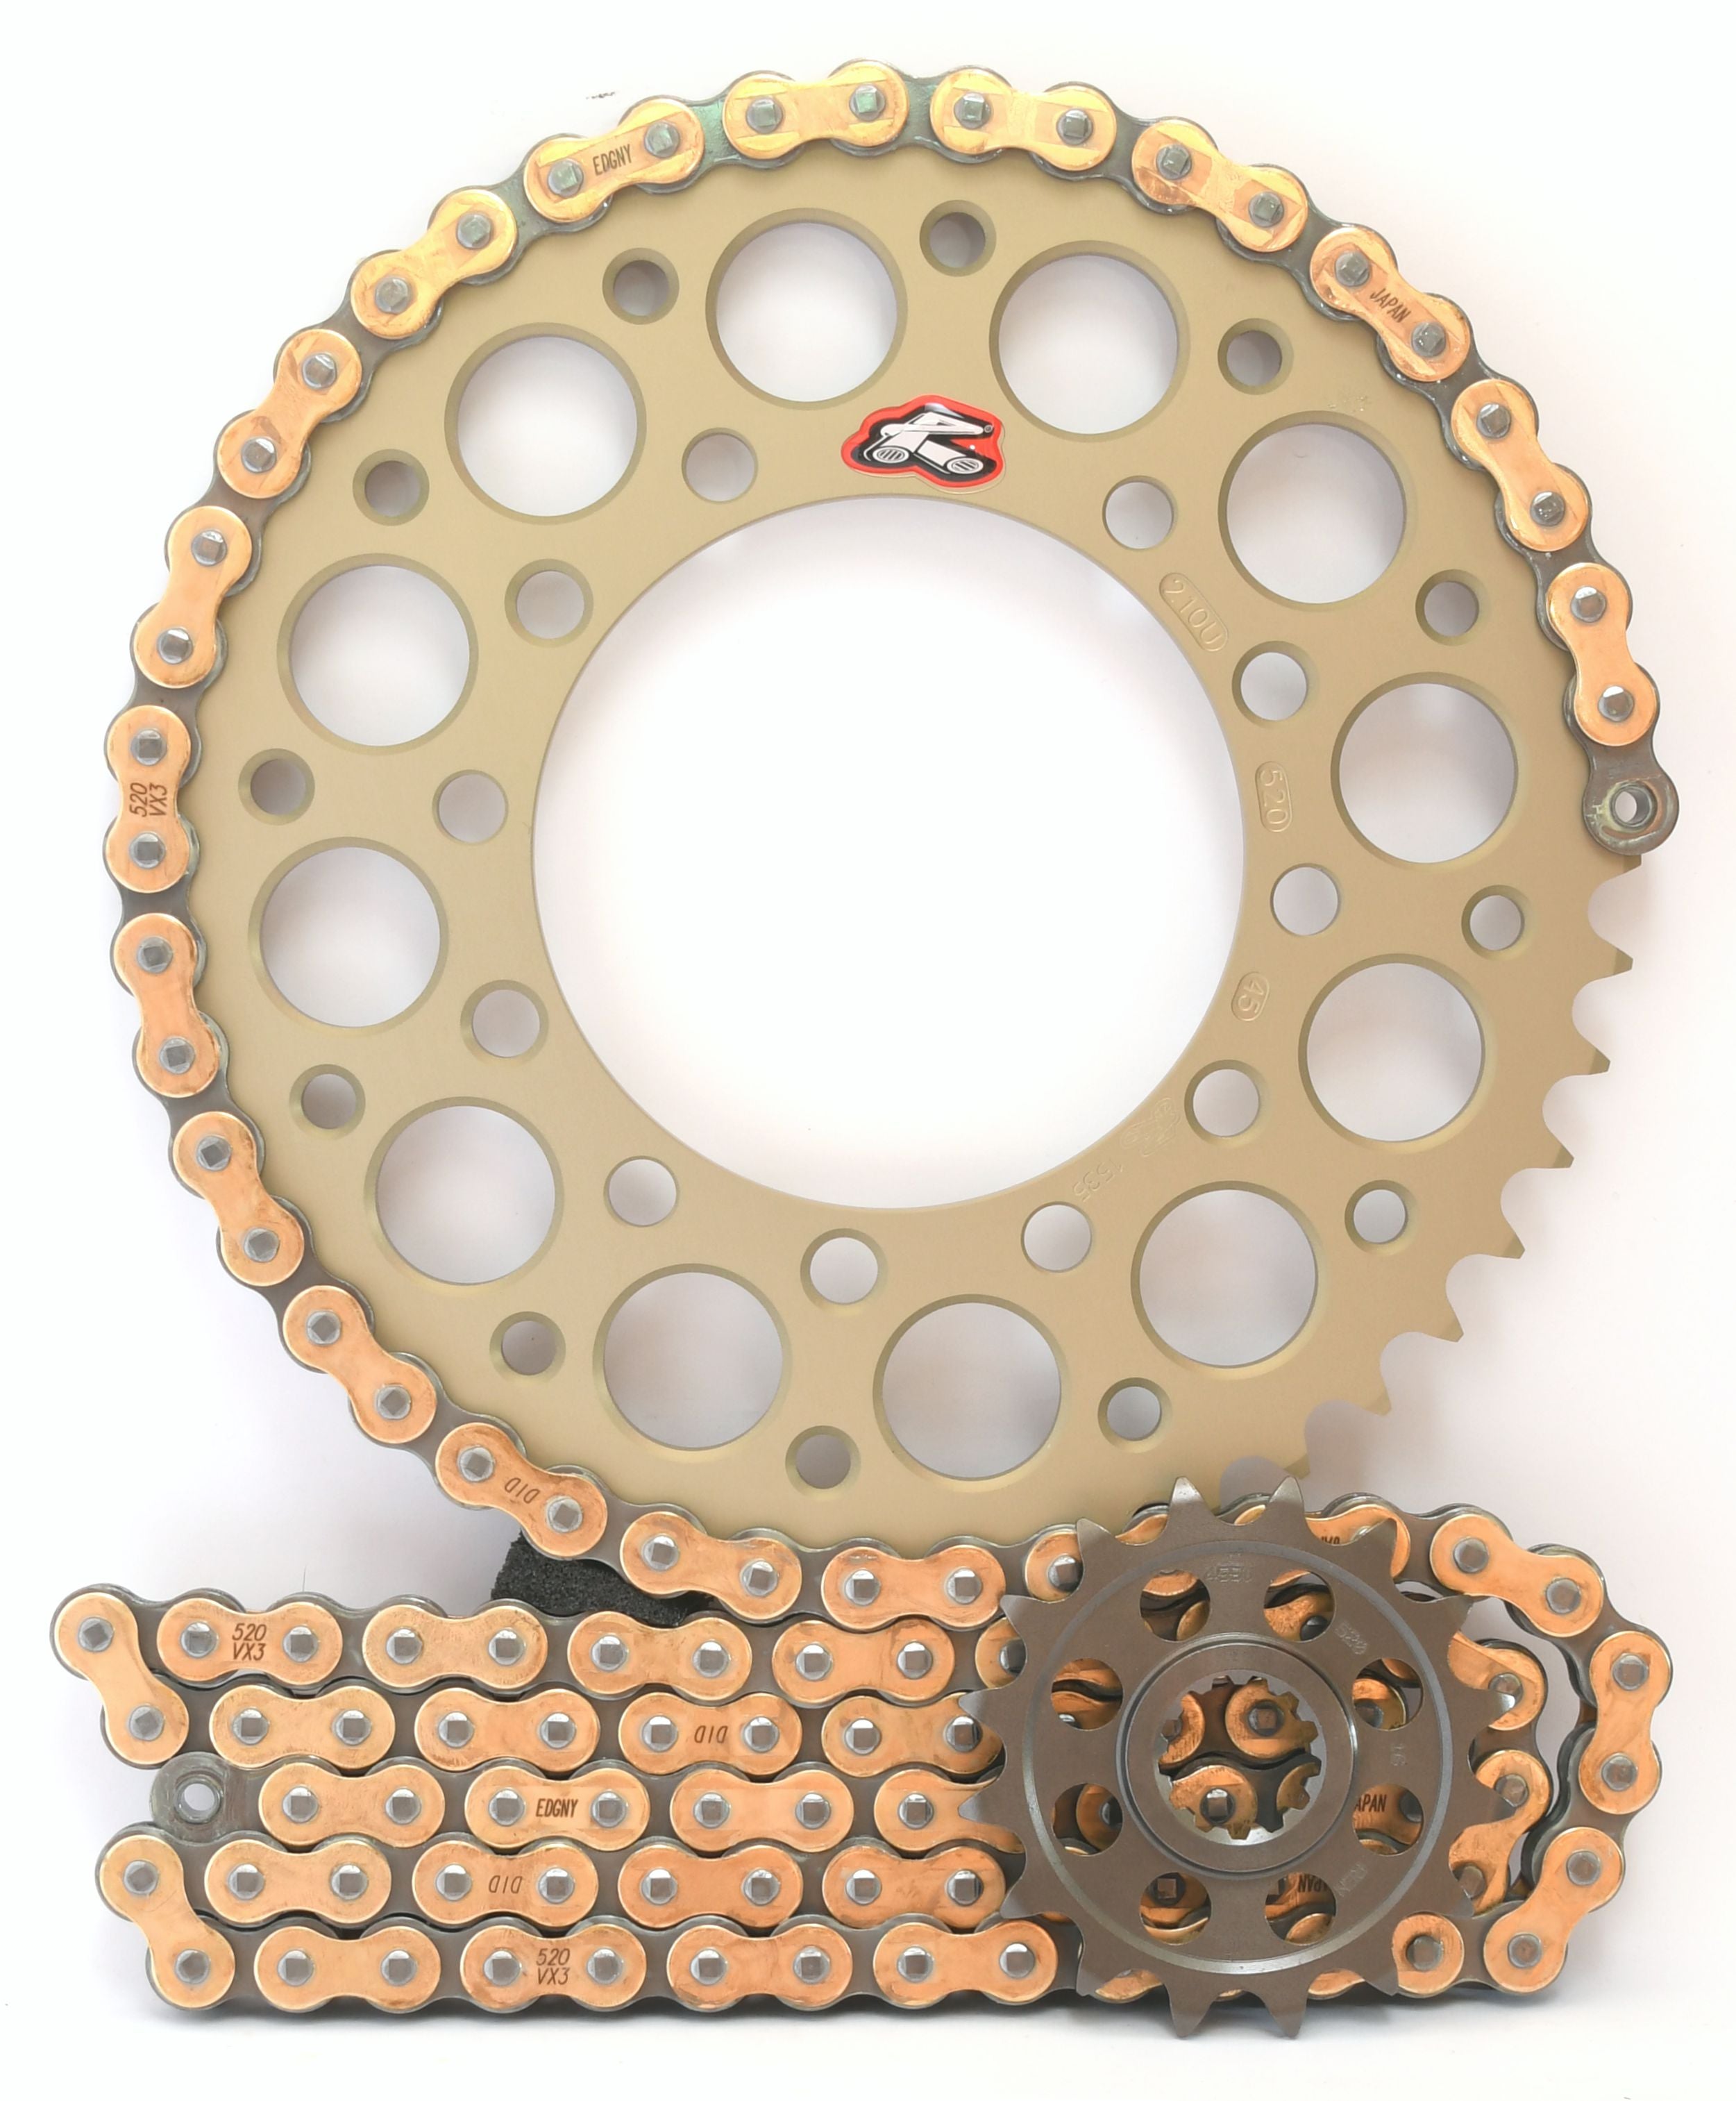 Renthal Ultralight and DID Chain & Sprocket Kit for Kawasaki ZX6R 2007-2018 - Standard Gearing